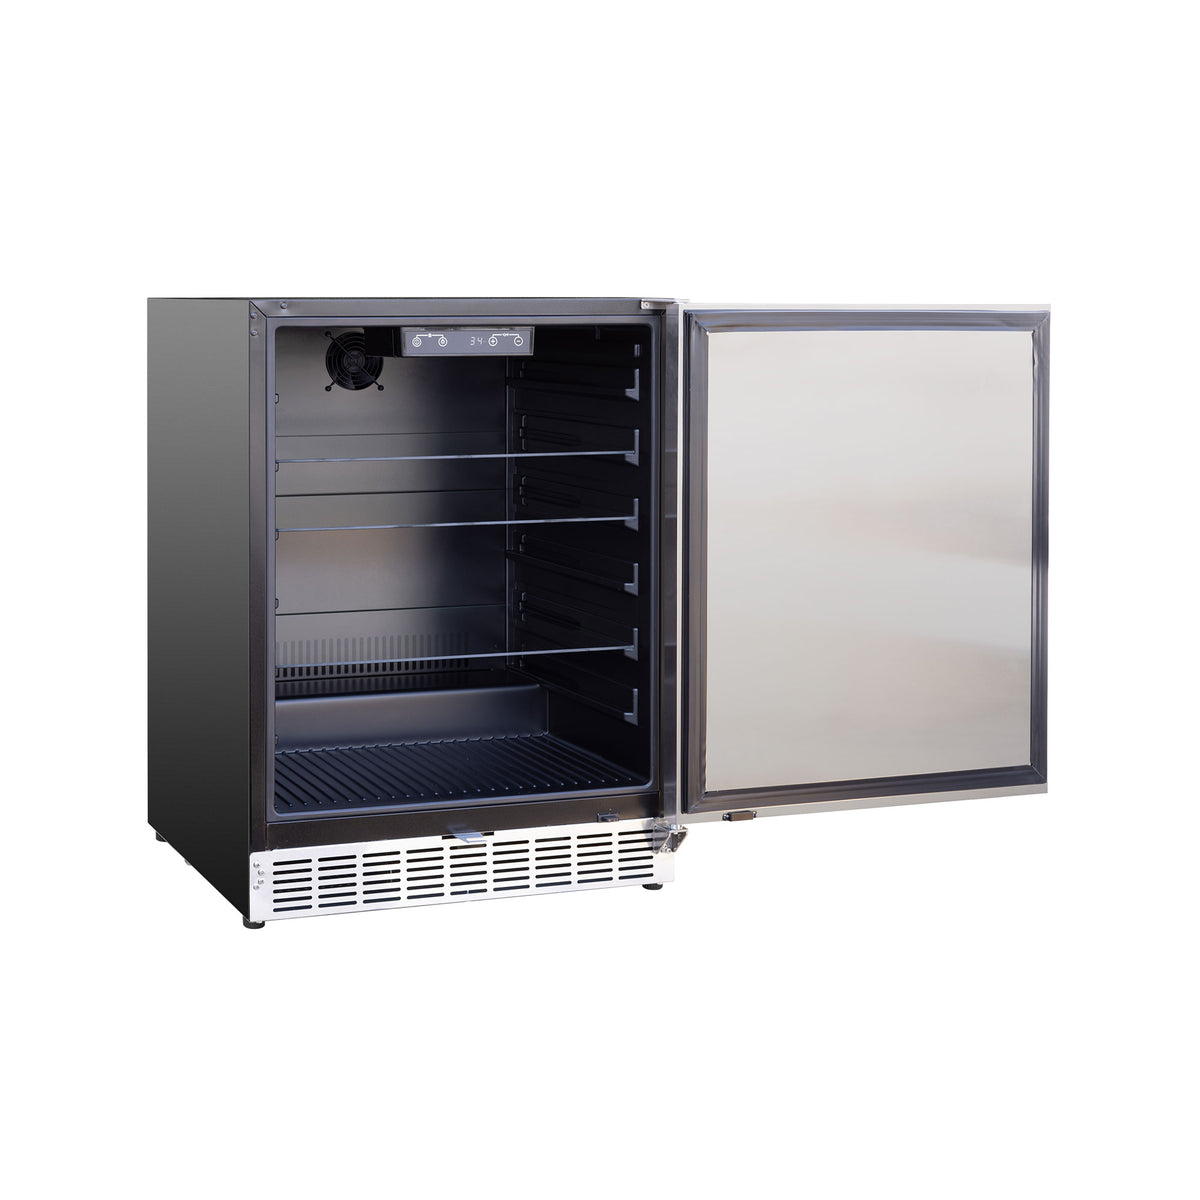 24" Outdoor Rated Refrigerator